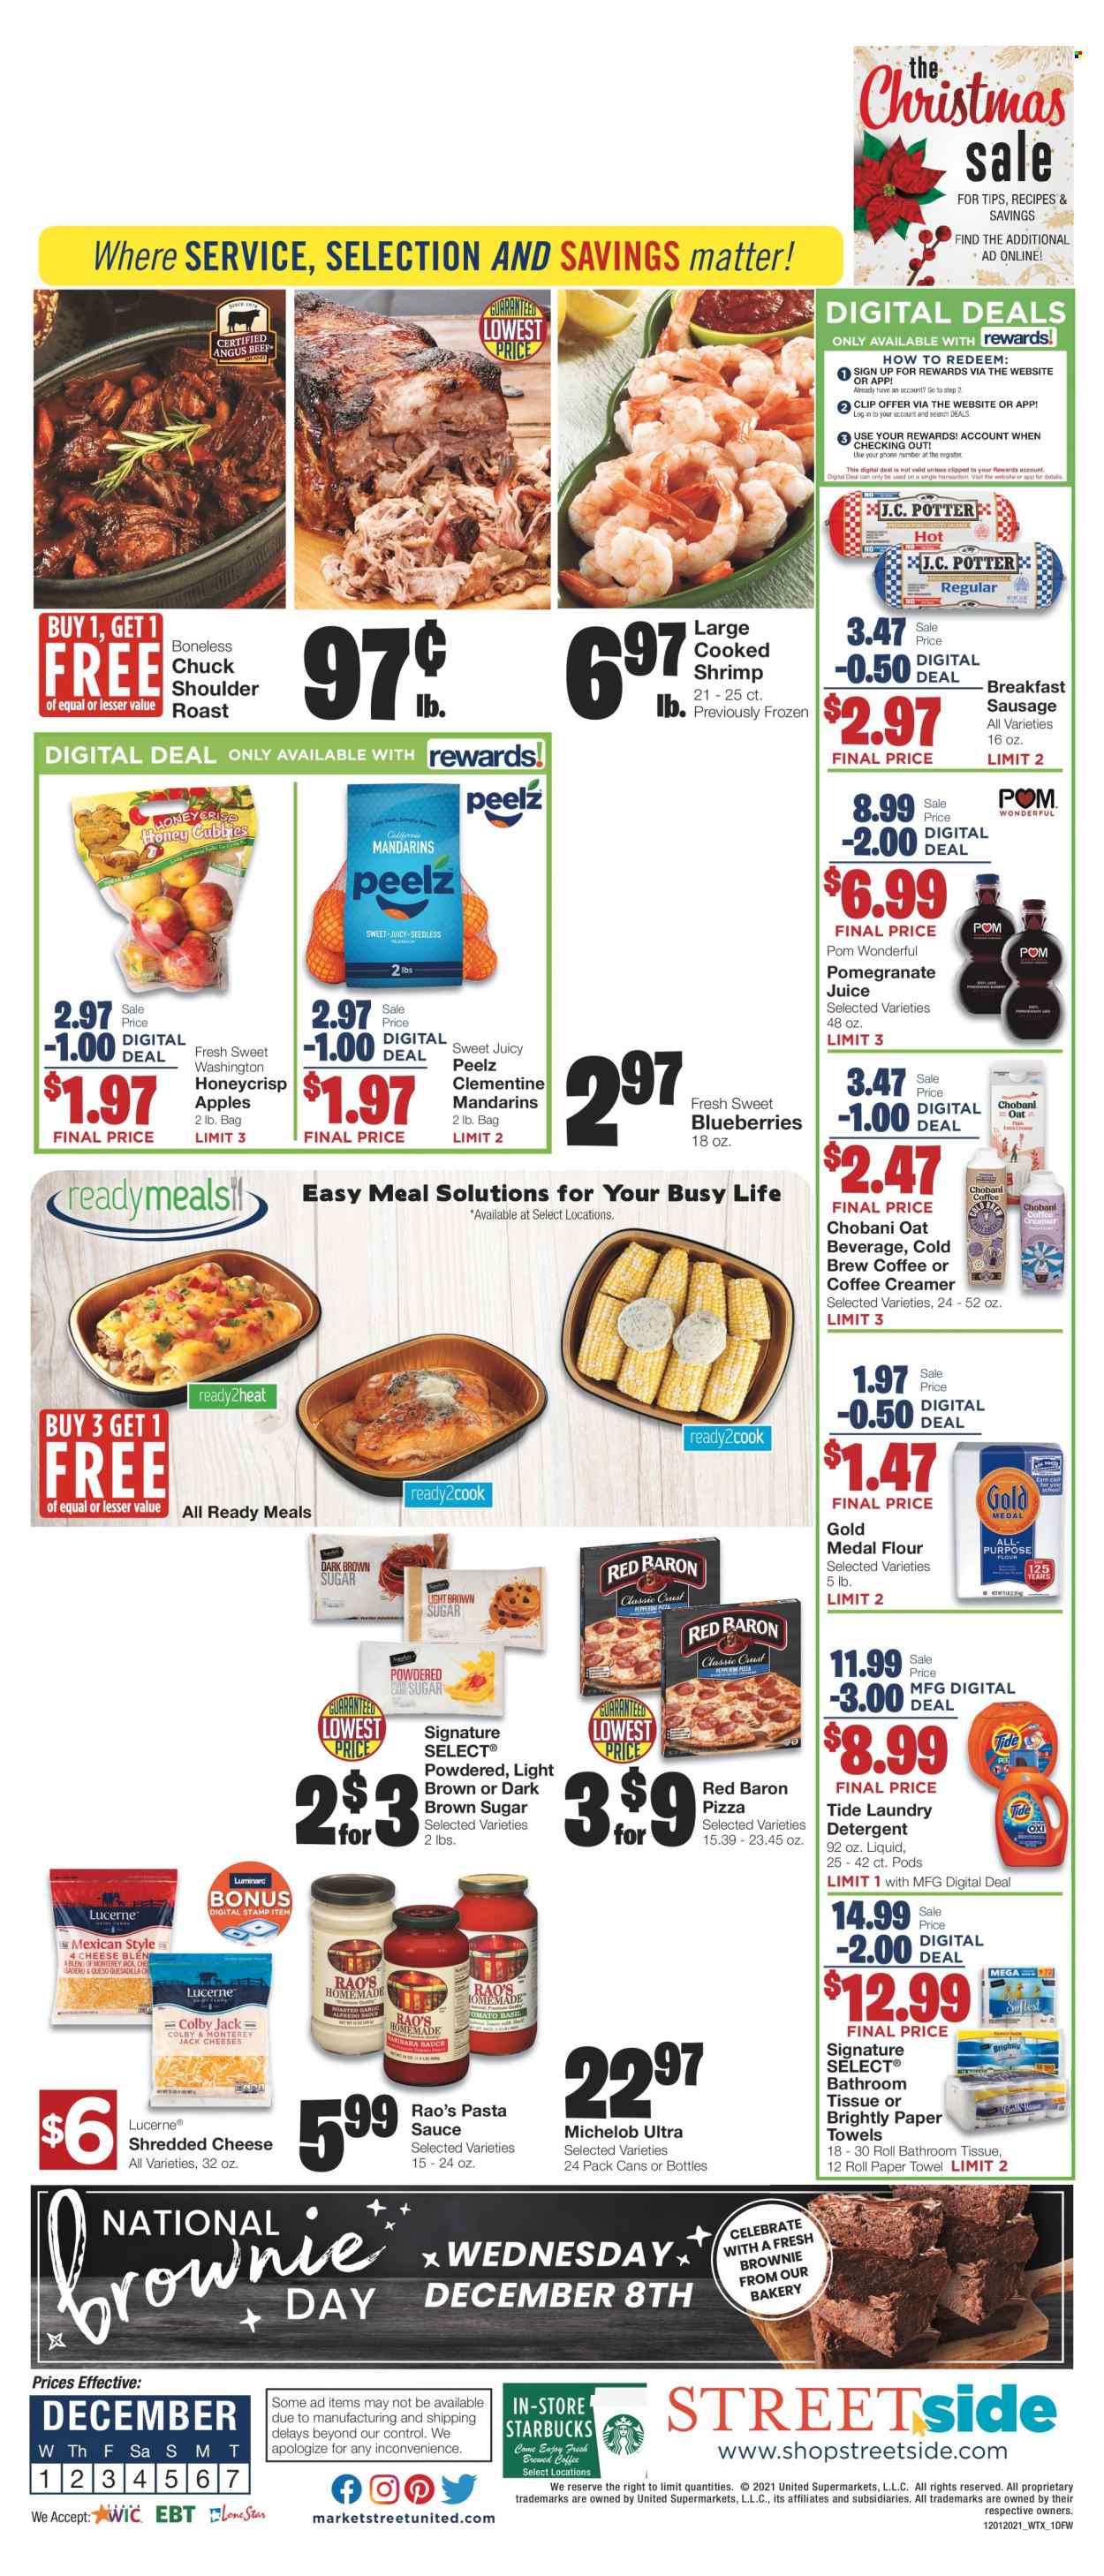 thumbnail - Market Street Flyer - 12/01/2021 - 12/07/2021 - Sales products - wheat bread, Sara Lee, apples, blueberries, mandarines, shrimps, pizza, pasta sauce, sauce, sausage, shredded cheese, Chobani, creamer, Red Baron, cane sugar, flour, oats, juice, Starbucks, beer, bath tissue, kitchen towels, paper towels, detergent, Tide, laundry detergent, Michelob, pomegranate. Page 1.